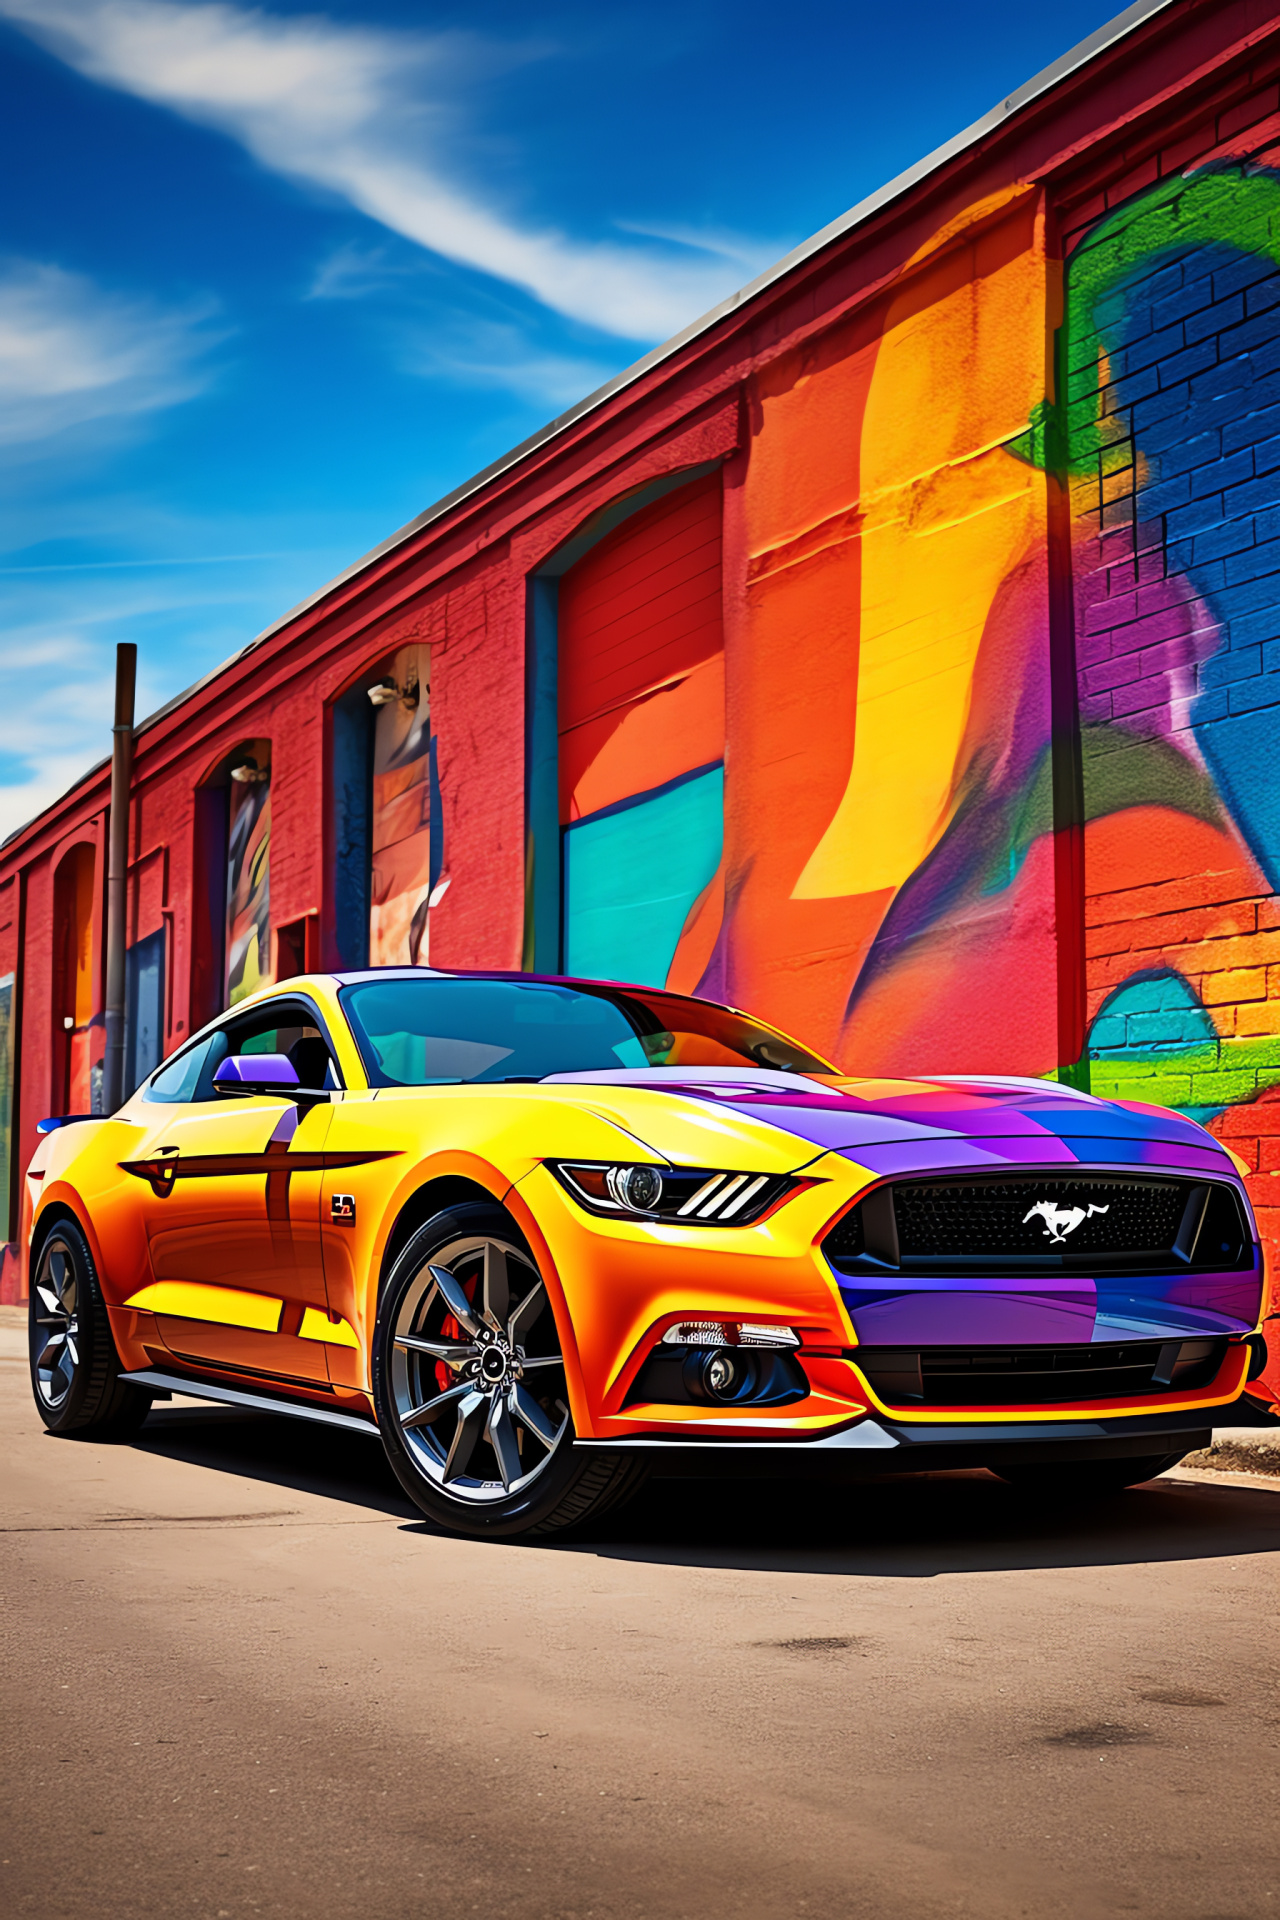 Ford Mustang character, Bold auto styling, Vibrant Mustang scene, American muscle essence, Car design, HD Phone Image